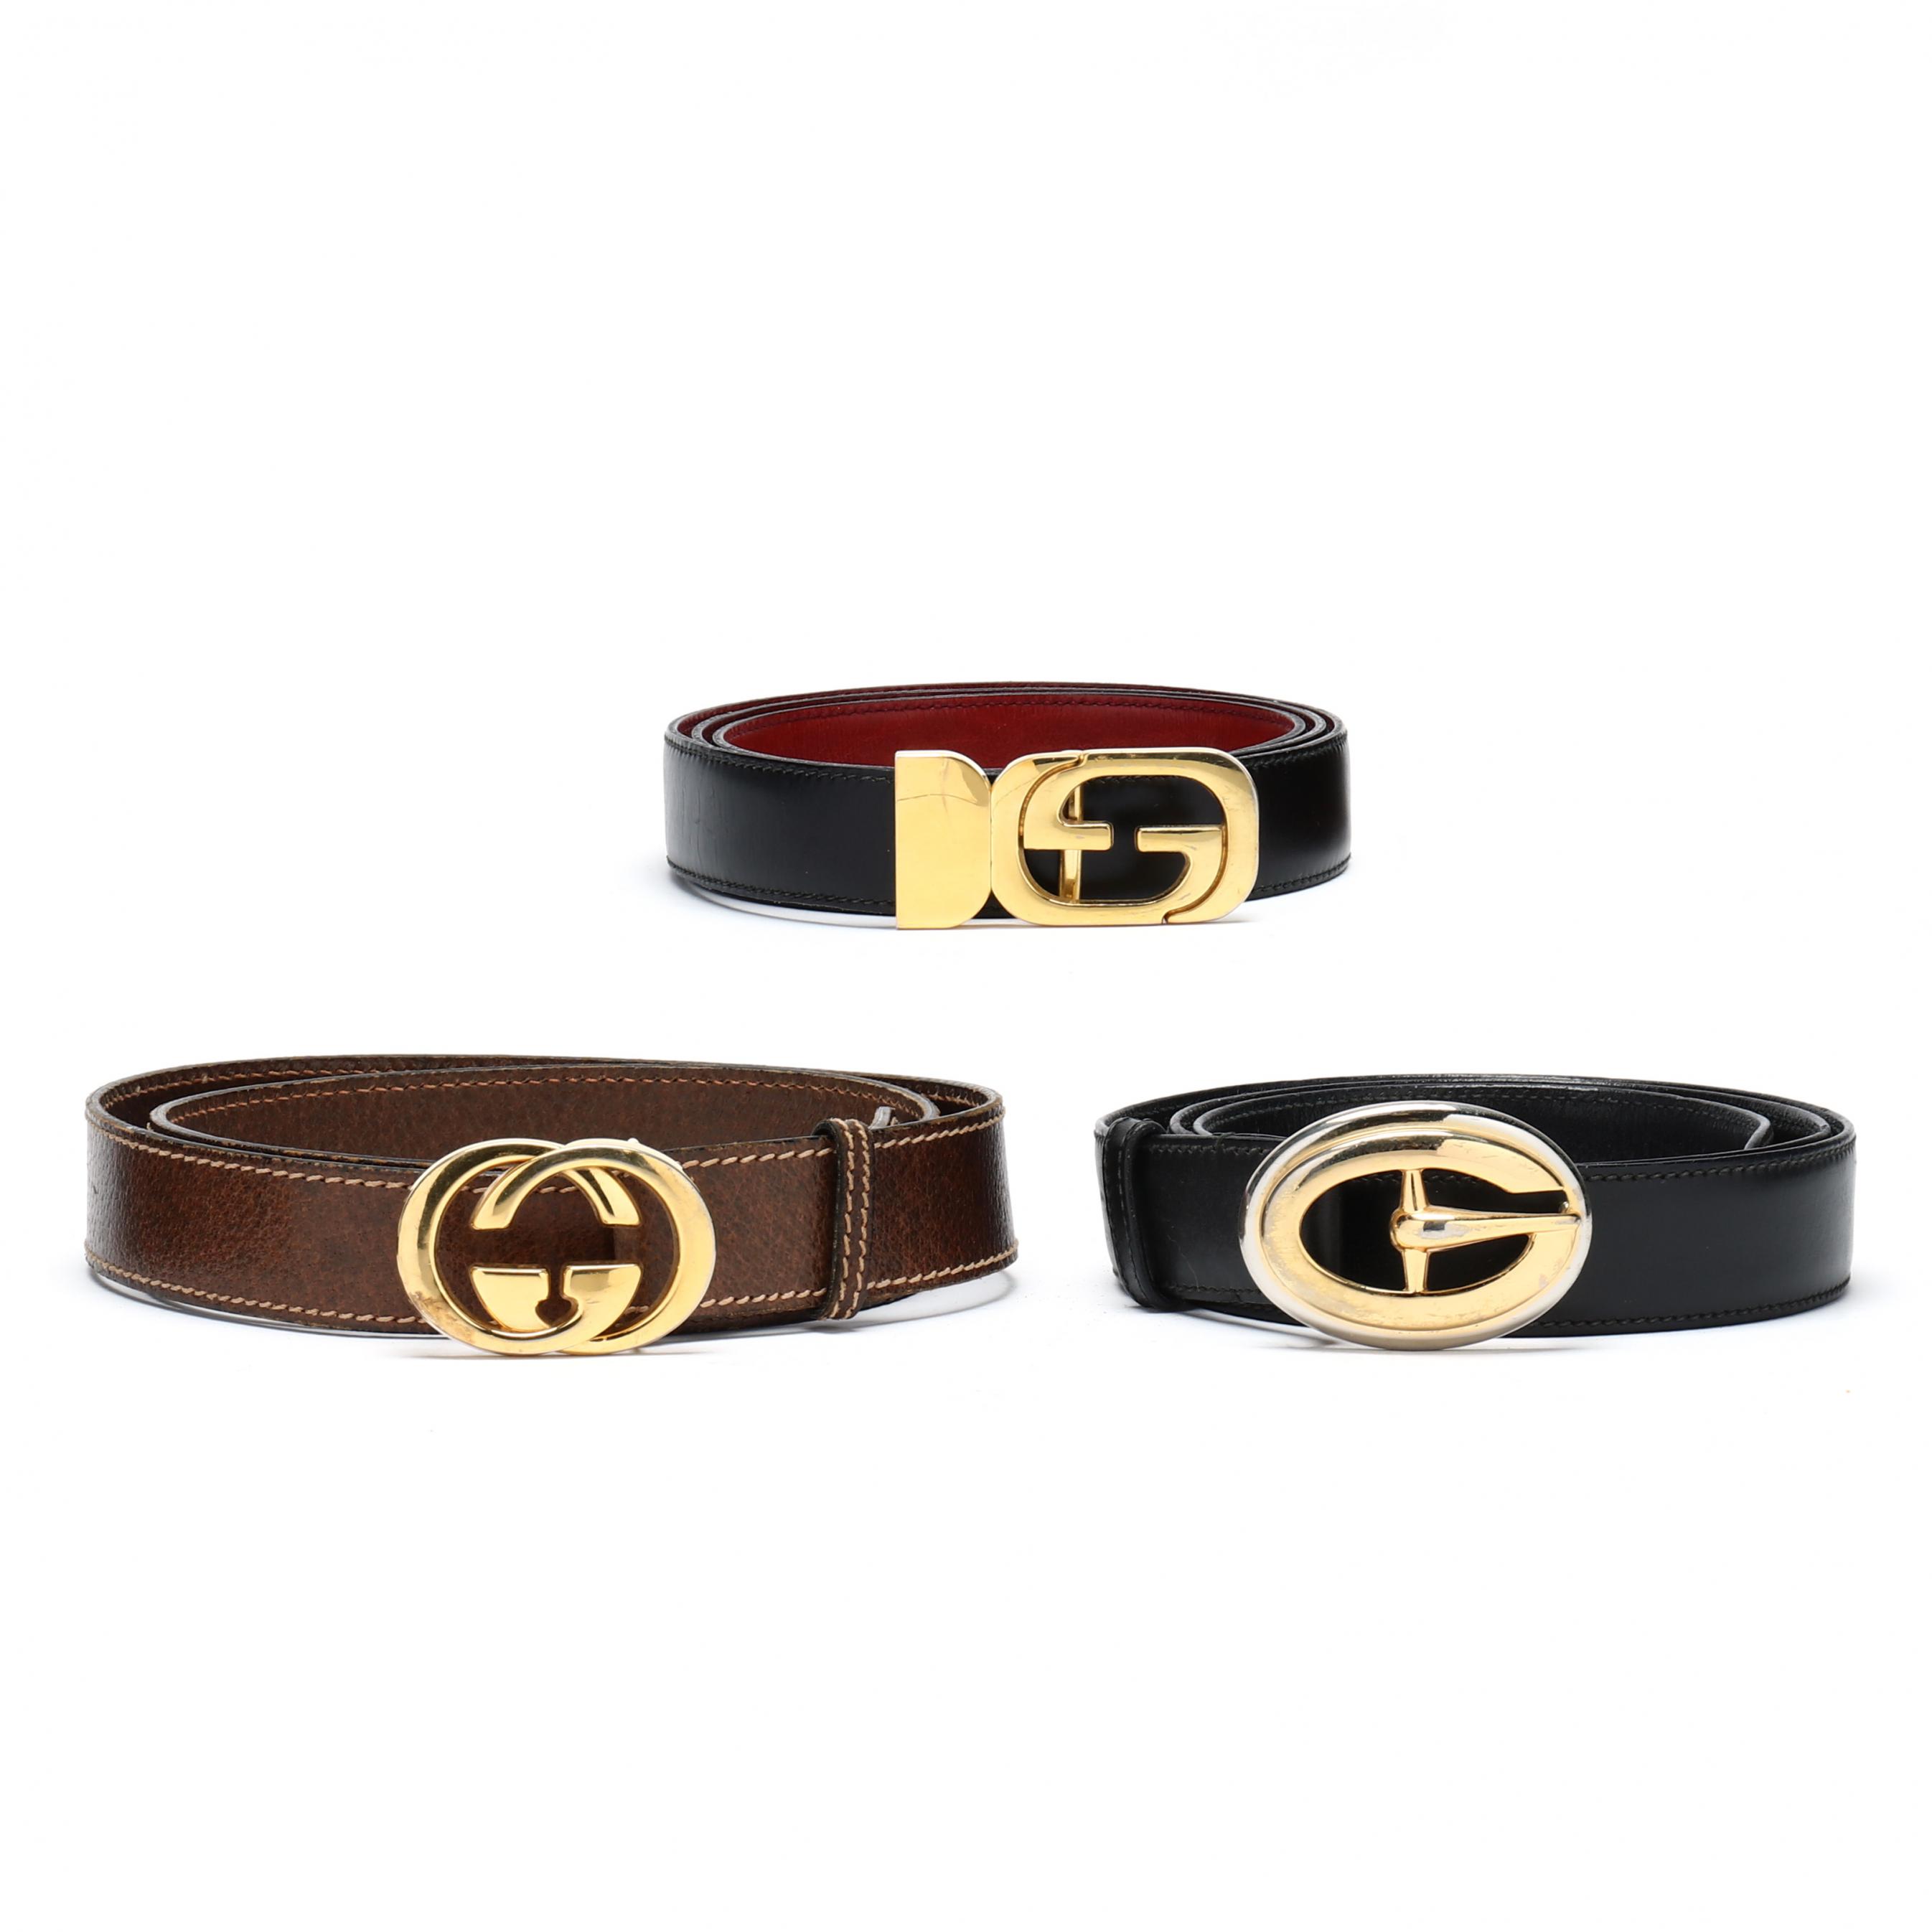 Three Gents Leather Belts with Buckles, Gucci (Lot 1010 - Holiday Boutique:  Luxury Accessories, Jewelry, & SilverDec 8, 2022, 10:00am)